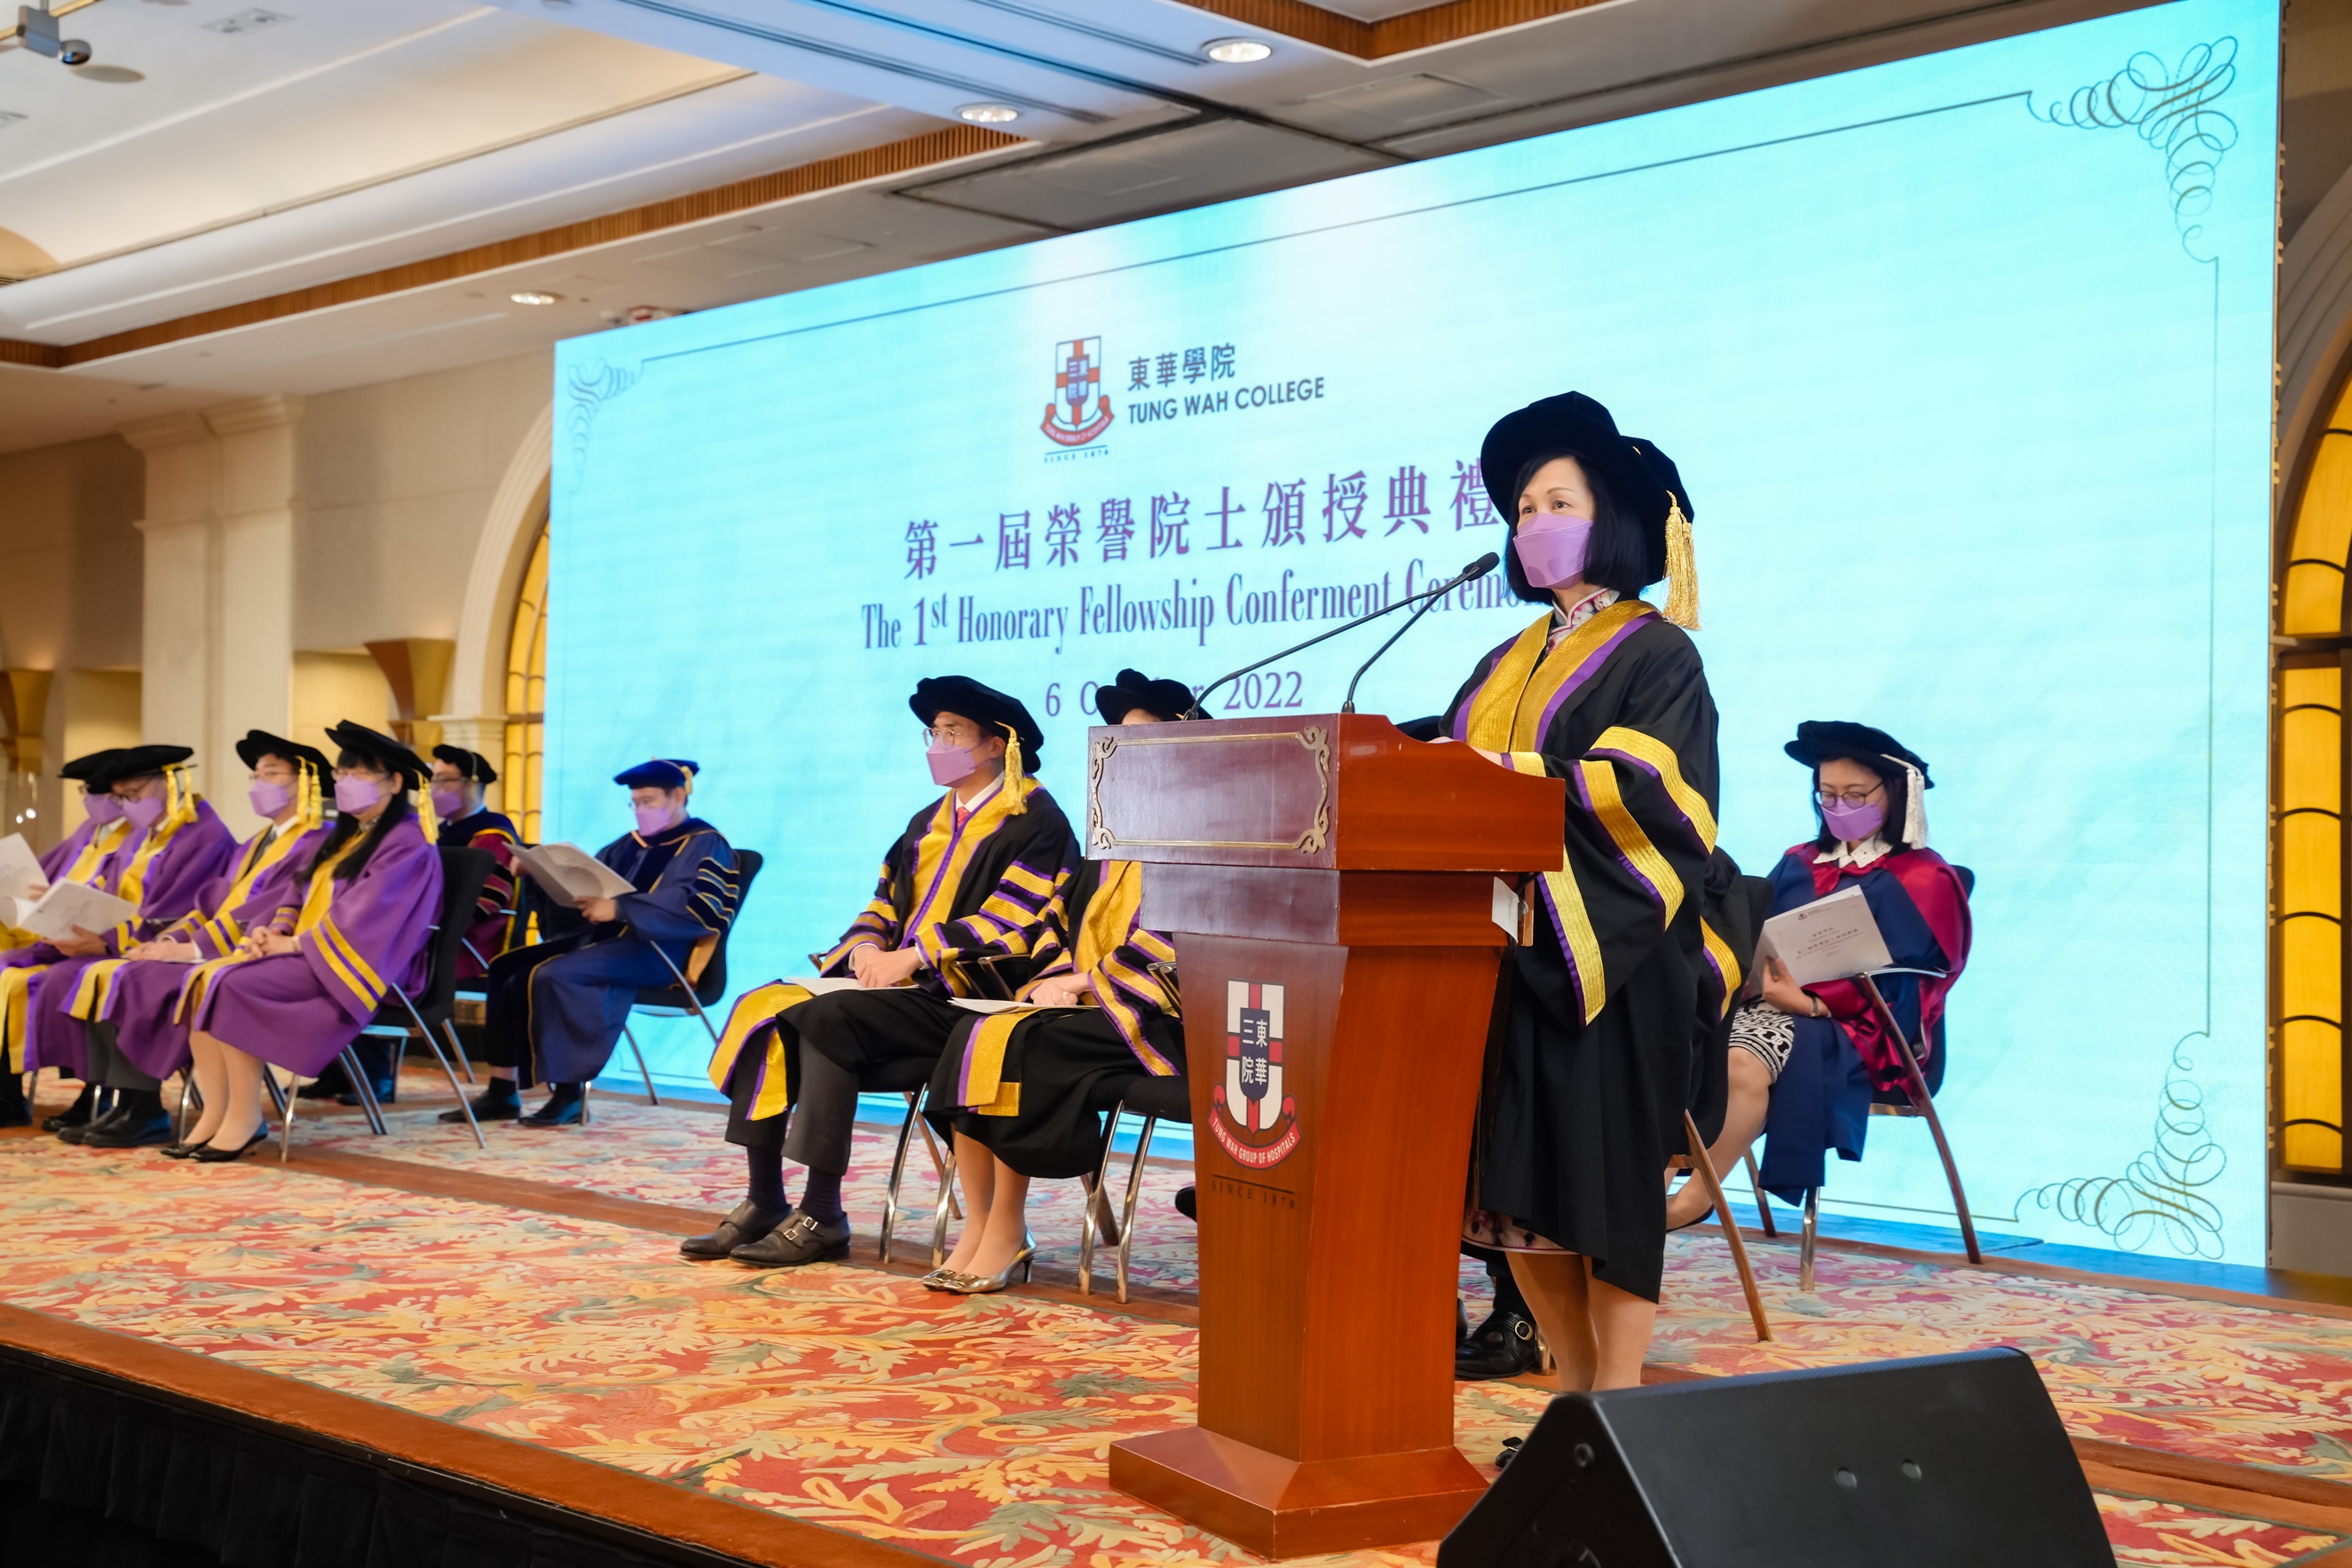 Professor Sally Chan, President of TWC delivers speech for the Ceremony.